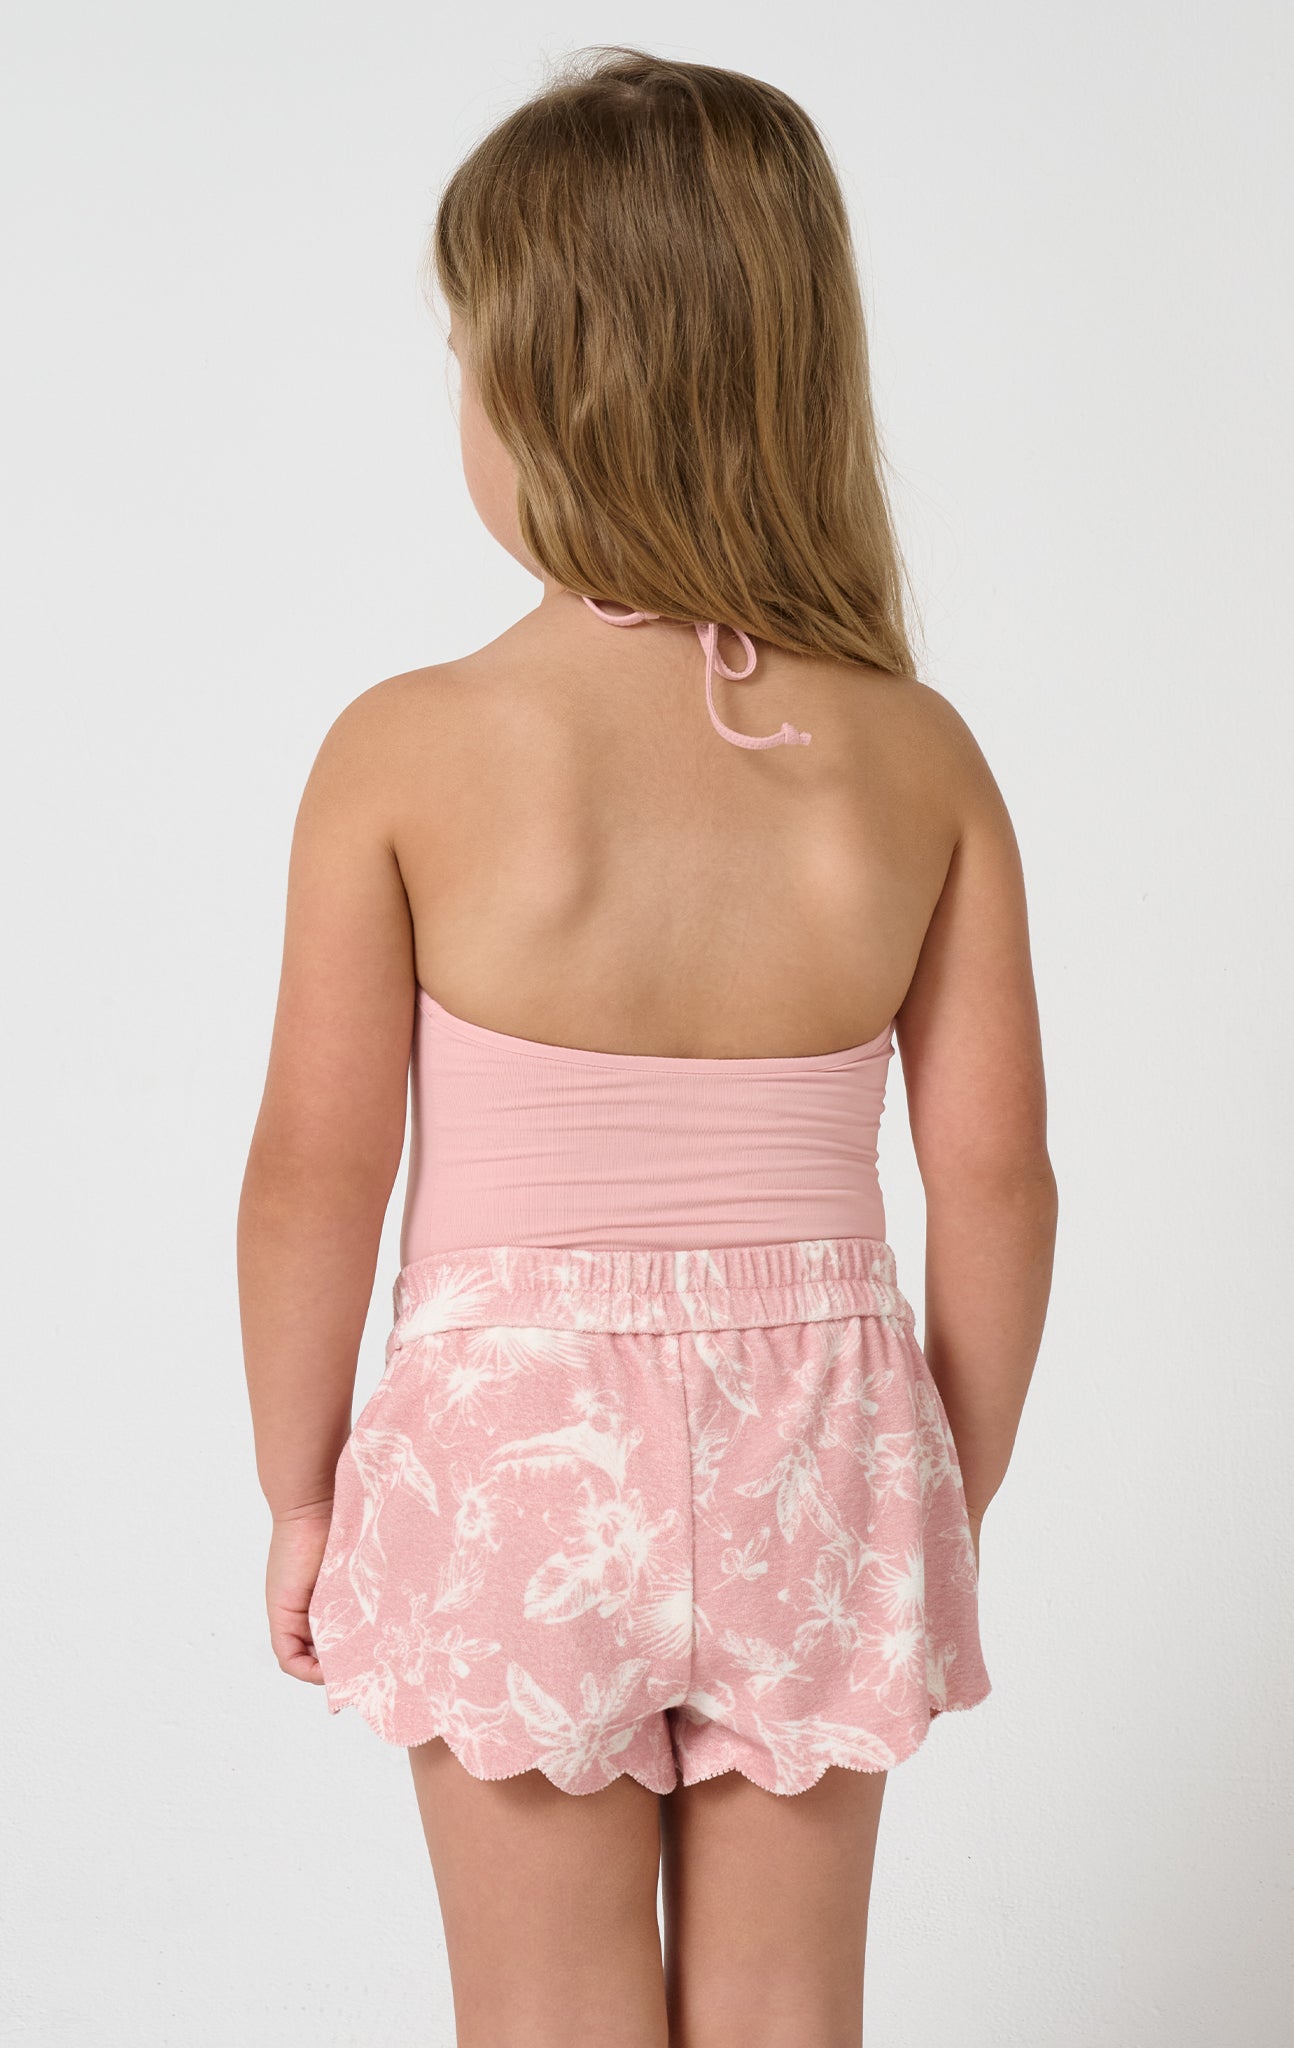 Bumby Bellini Shorts in Calm Floral Print MARYSIA